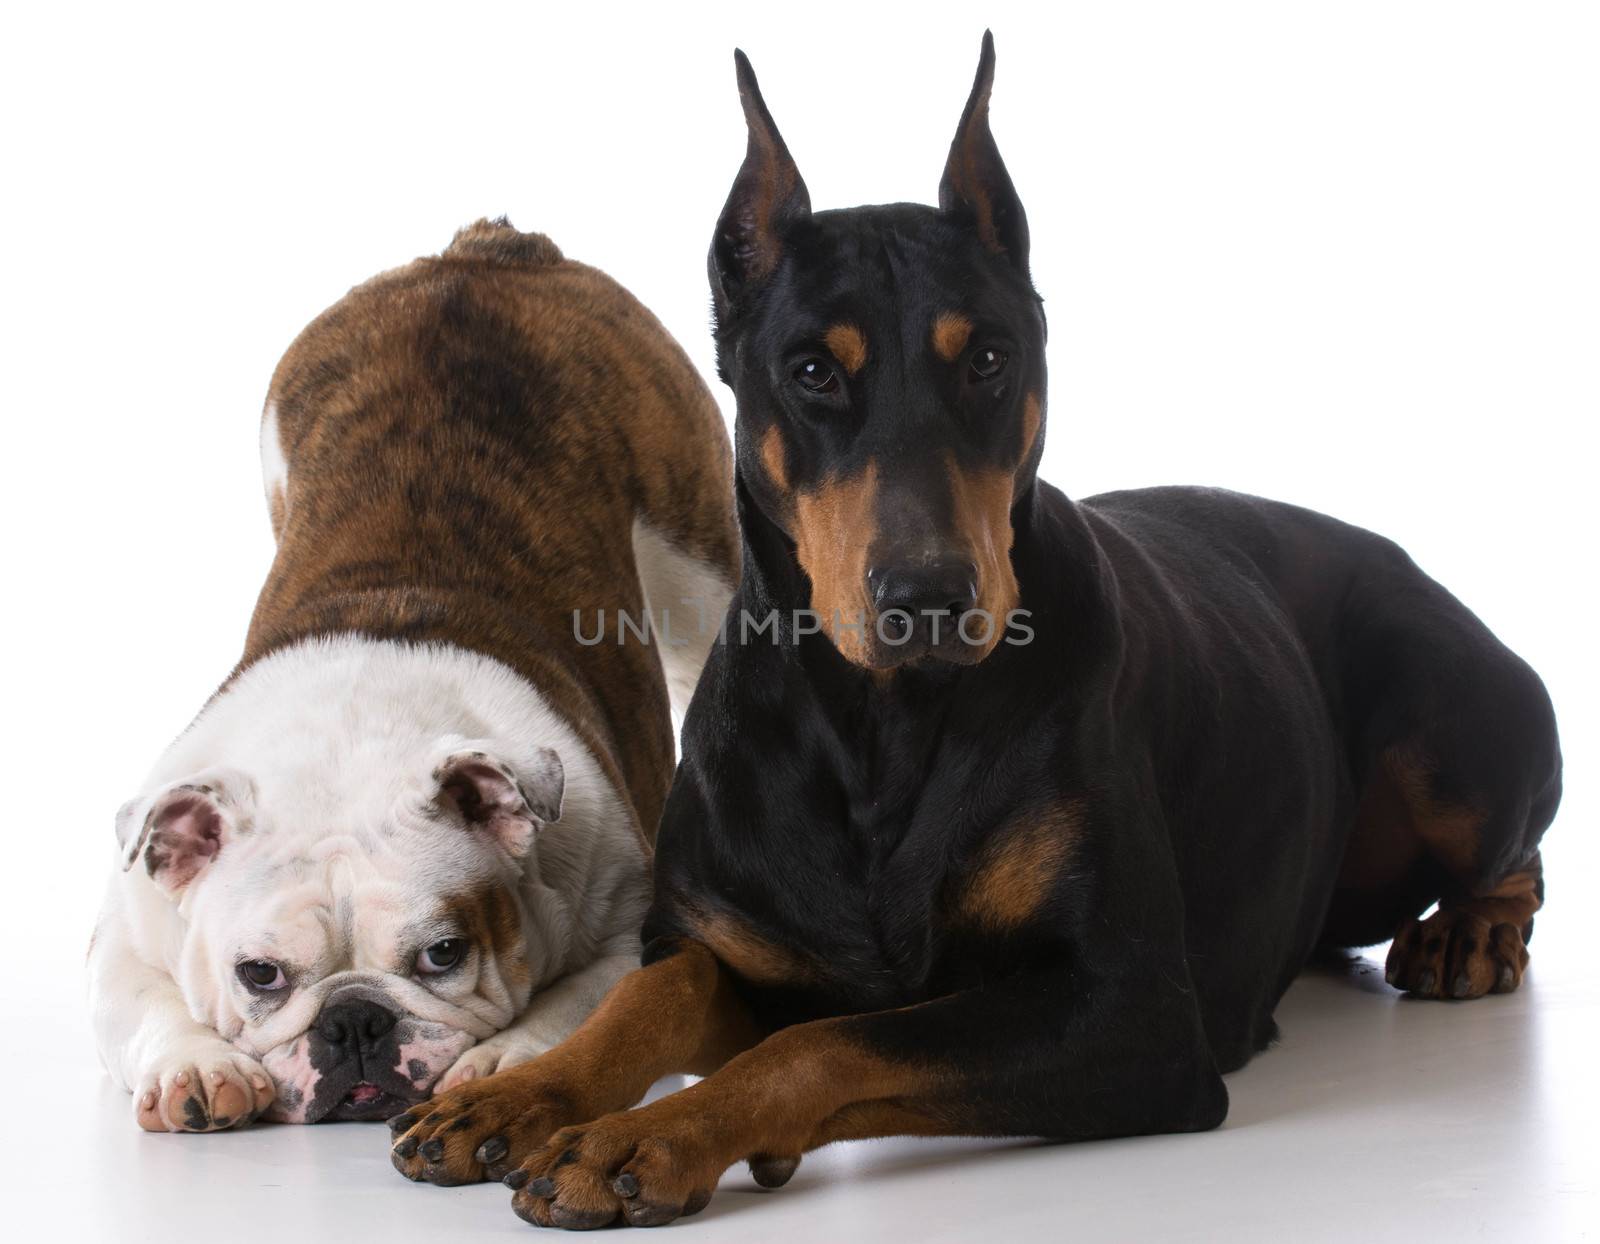 two dogs - bulldog and doberman together on white background